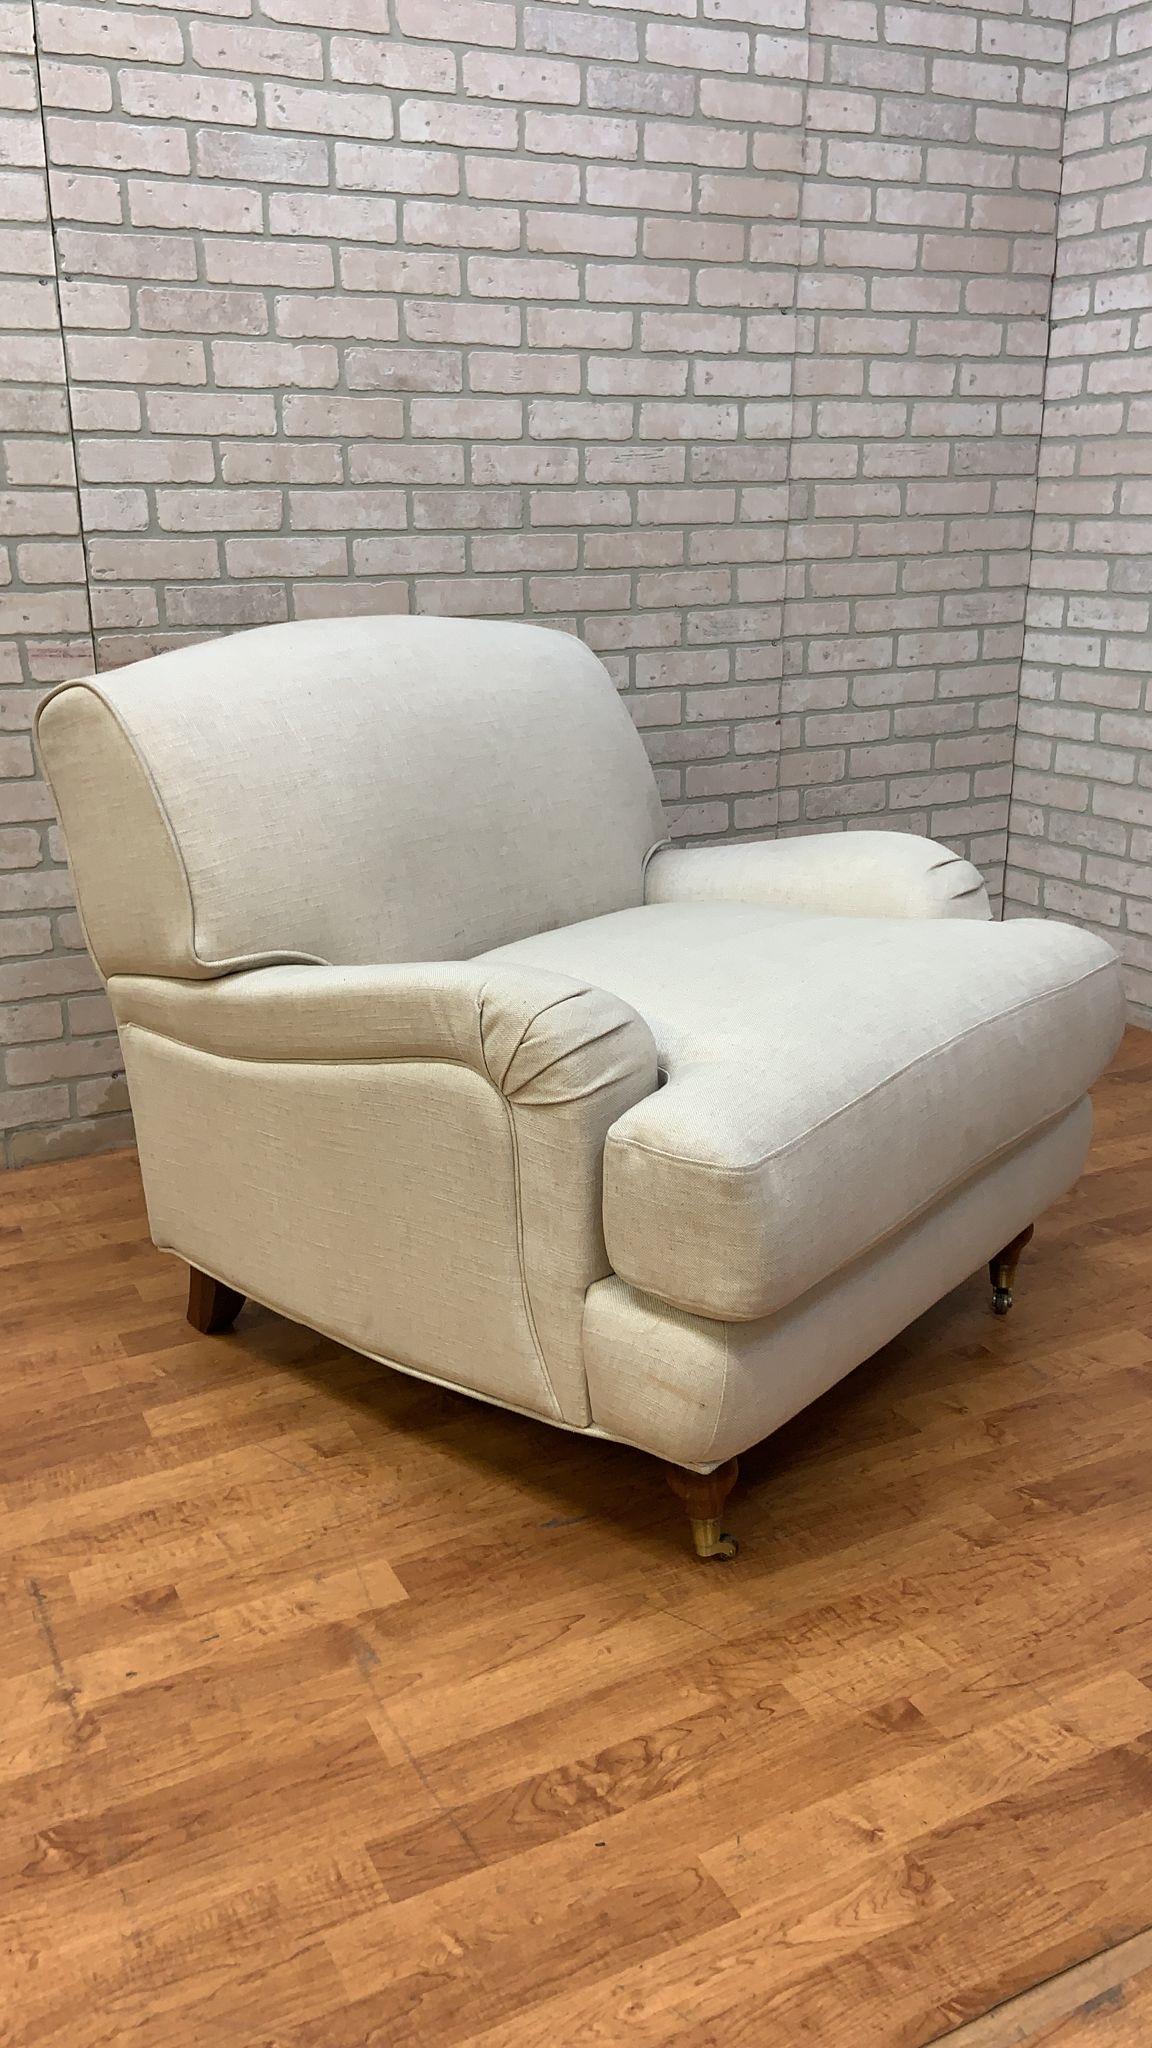 Vintage Rolled Arm Sydney Club Chair Upholstered in Cream Linen

Beautifully crafted vintage rolled arm Sydney club chair upholstered in cream linen. Front turned wood carved legs on antique brass casters. This Sydney club chair is versatile,